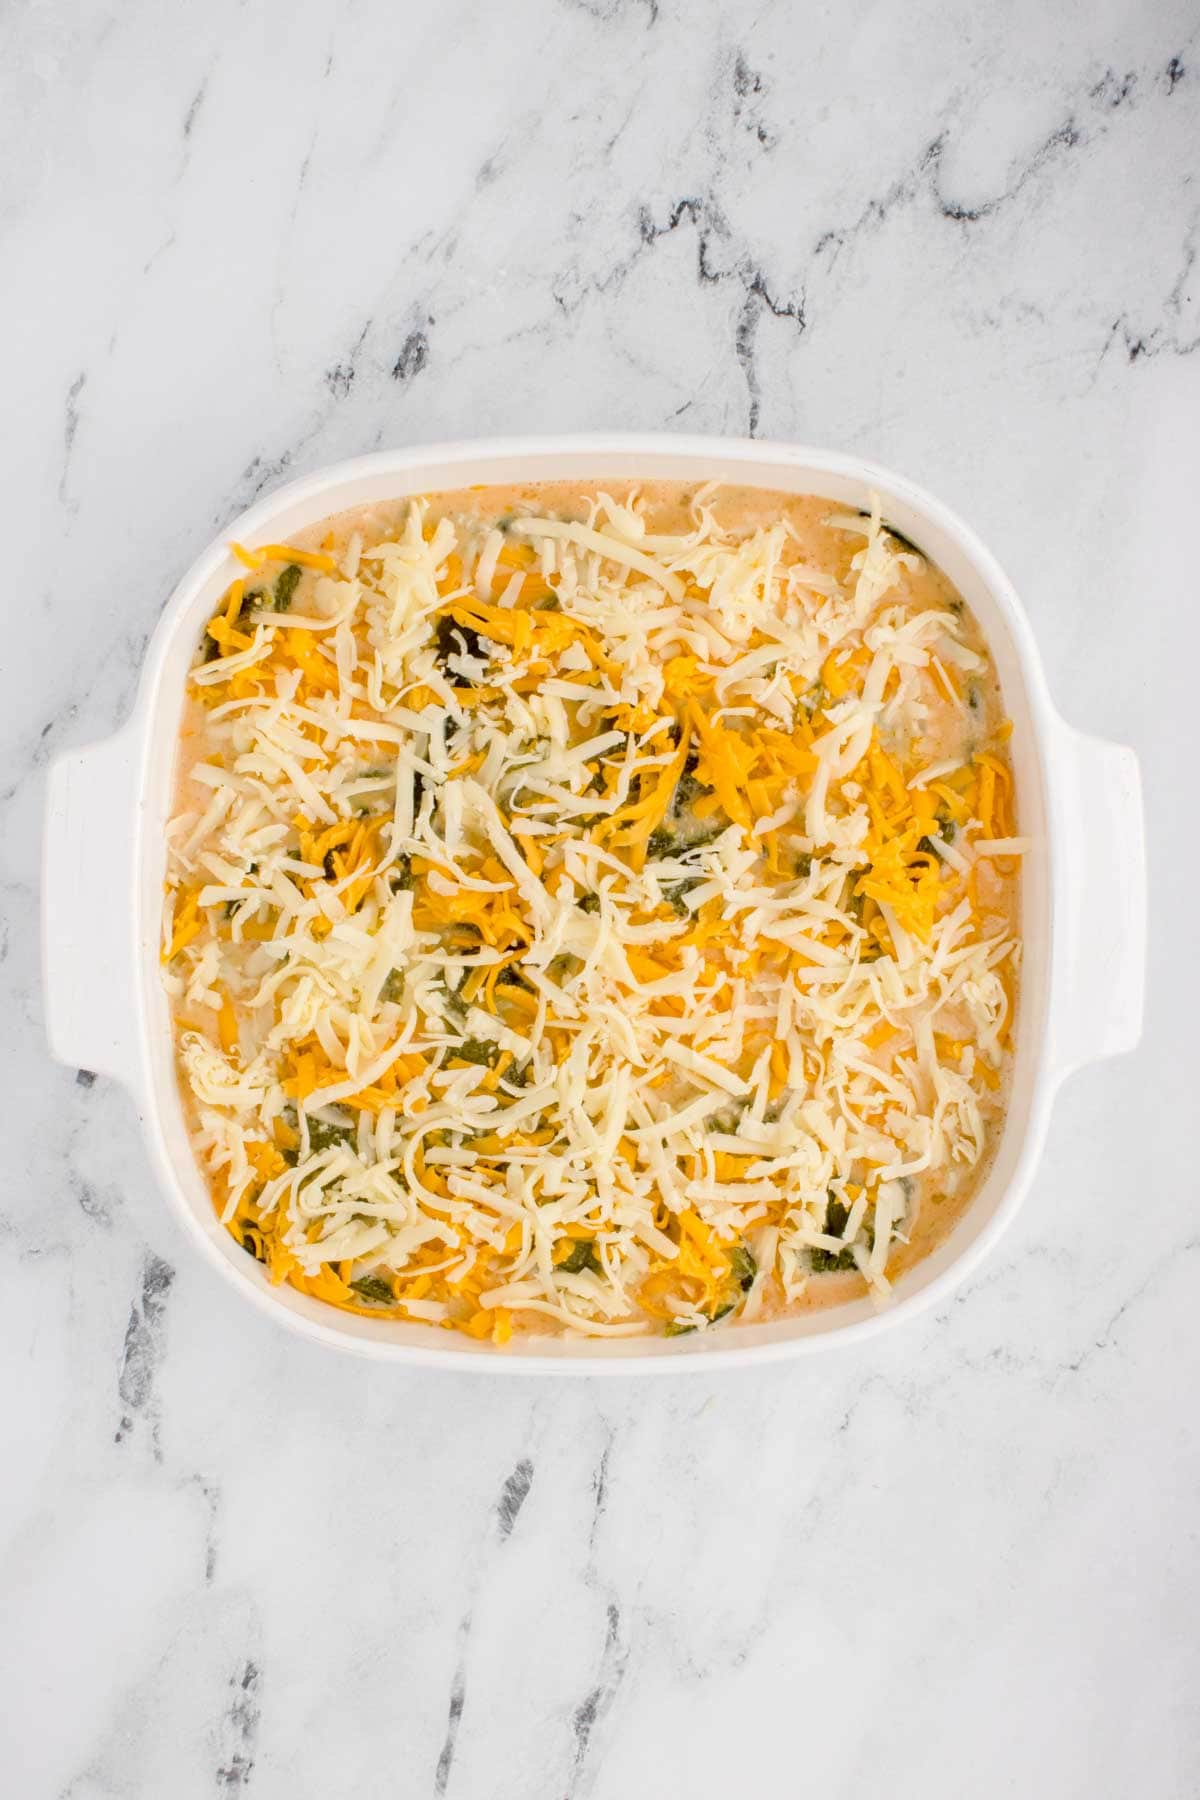 shredded cheese on top of chili relleno casserole in a baking dish